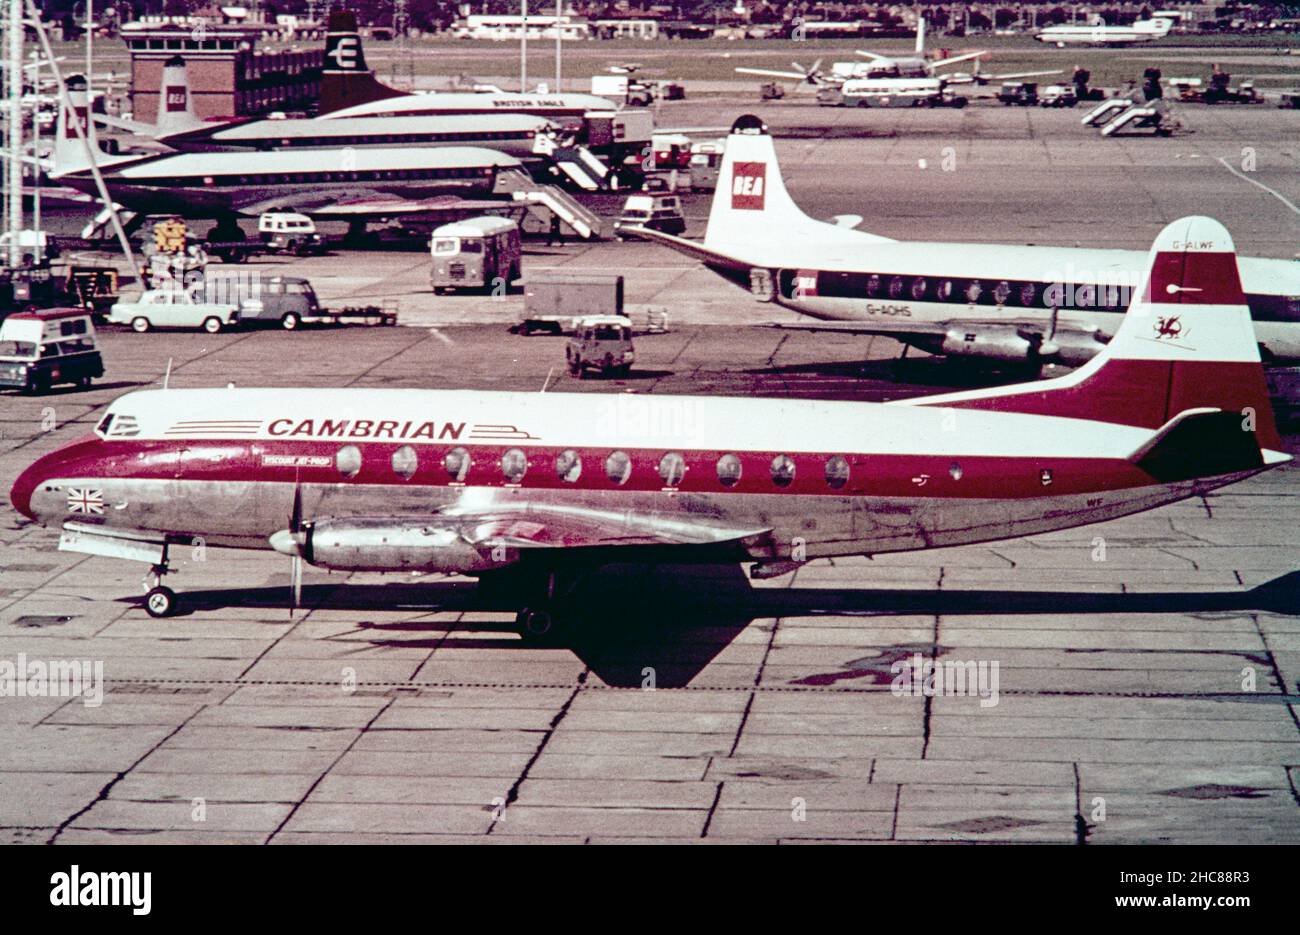 A Cambrian Airways Vickers Viscount Airliner, registration G-ALWF, at London Heathrow Airport in the 1960s. Stock Photo